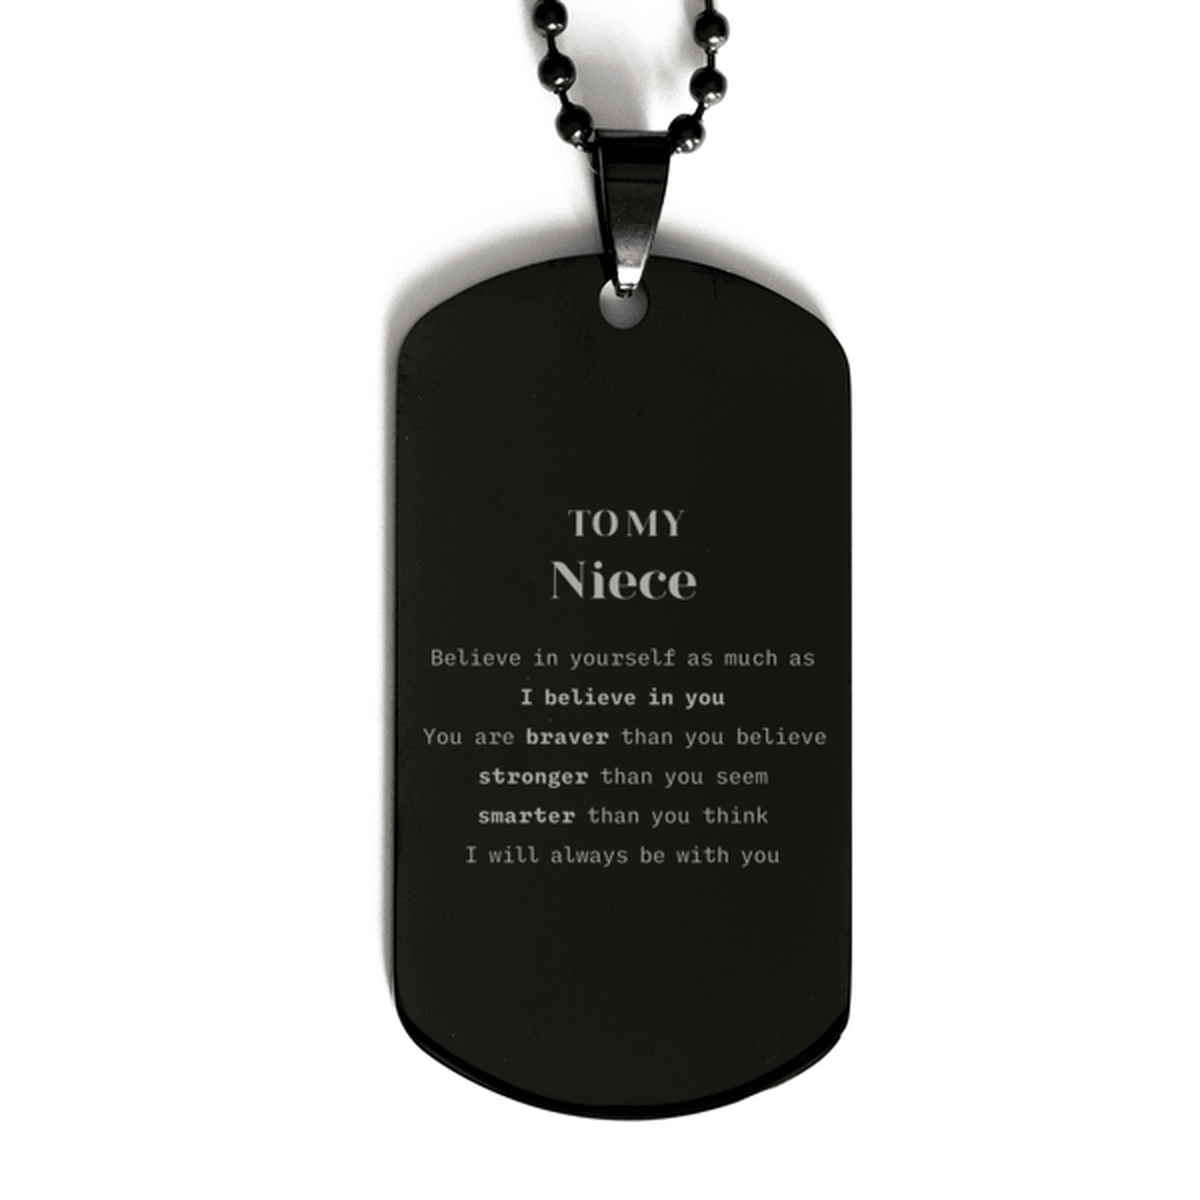 Niece Black Dog Tag Gifts, To My Niece You are braver than you believe, stronger than you seem, Inspirational Gifts For Niece Engraved, Birthday, Christmas Gifts For Niece Men Women